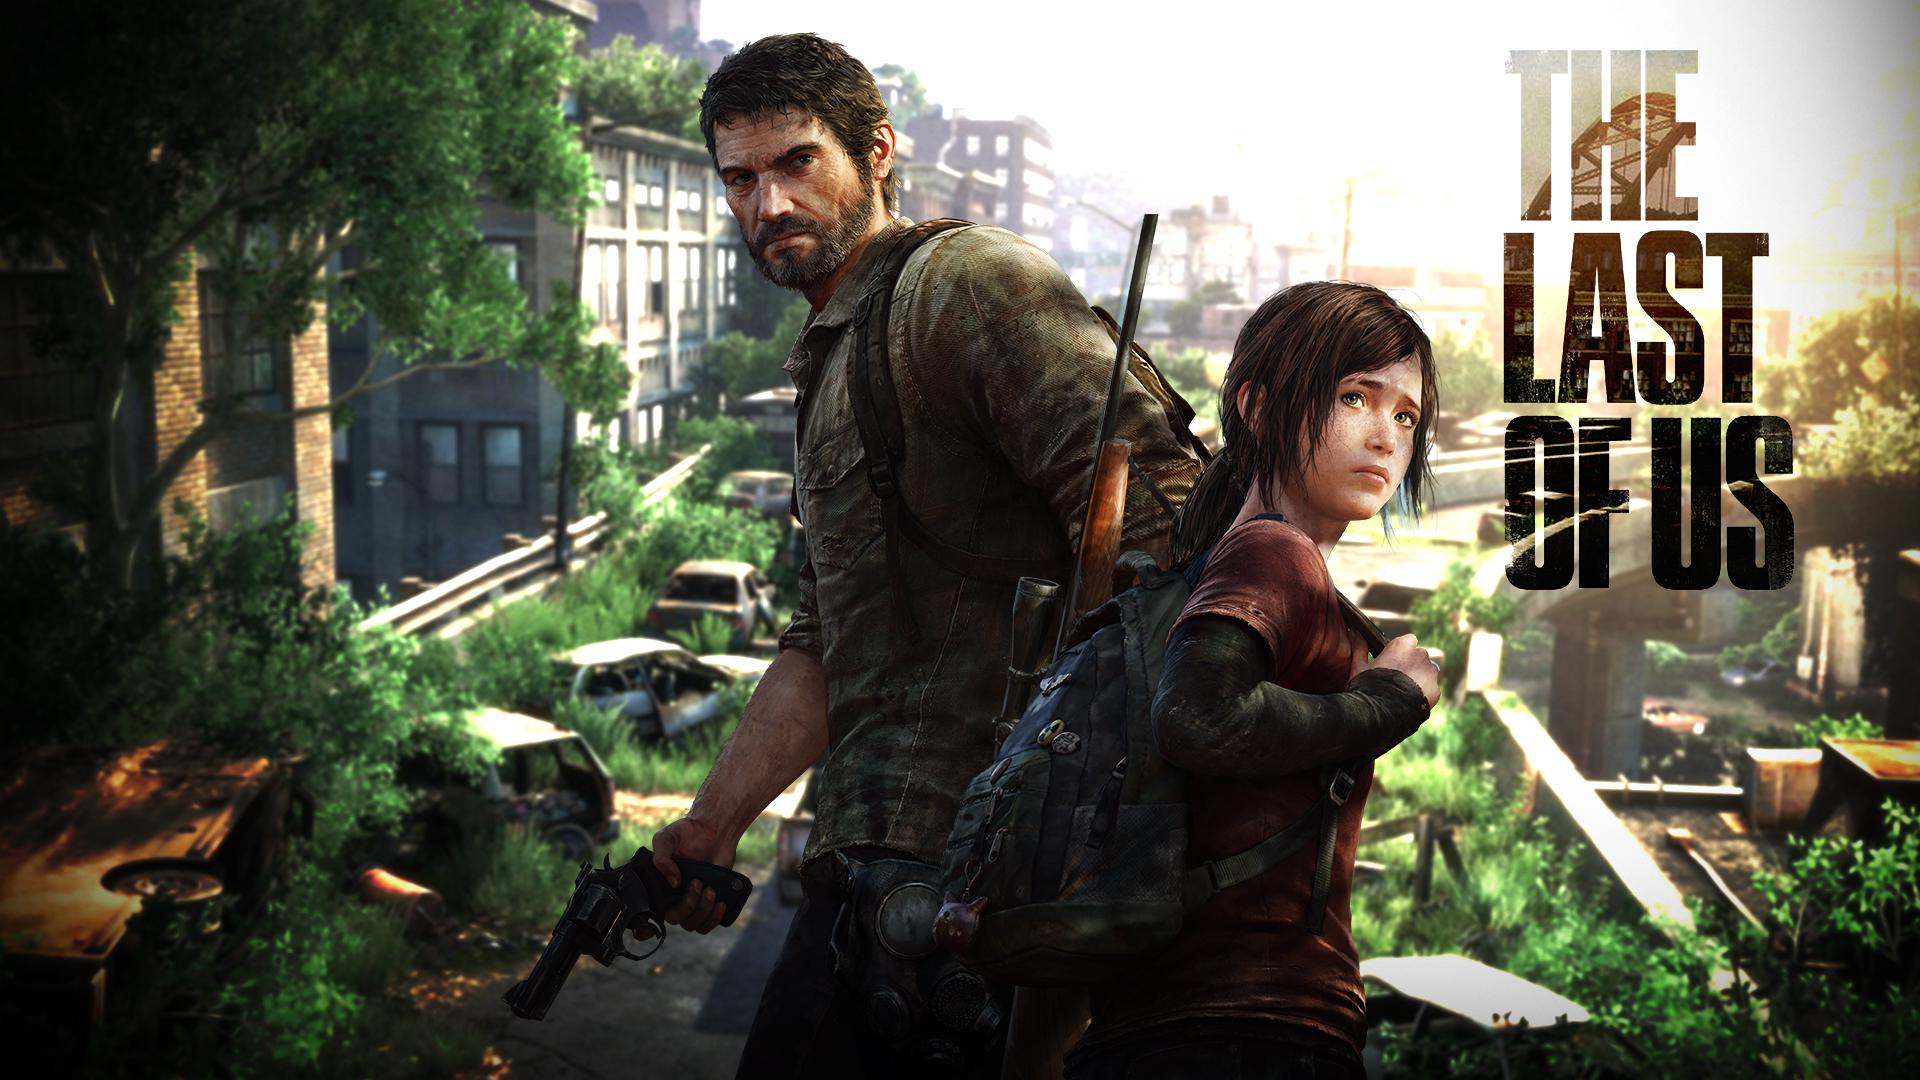 The Last Of Us #13